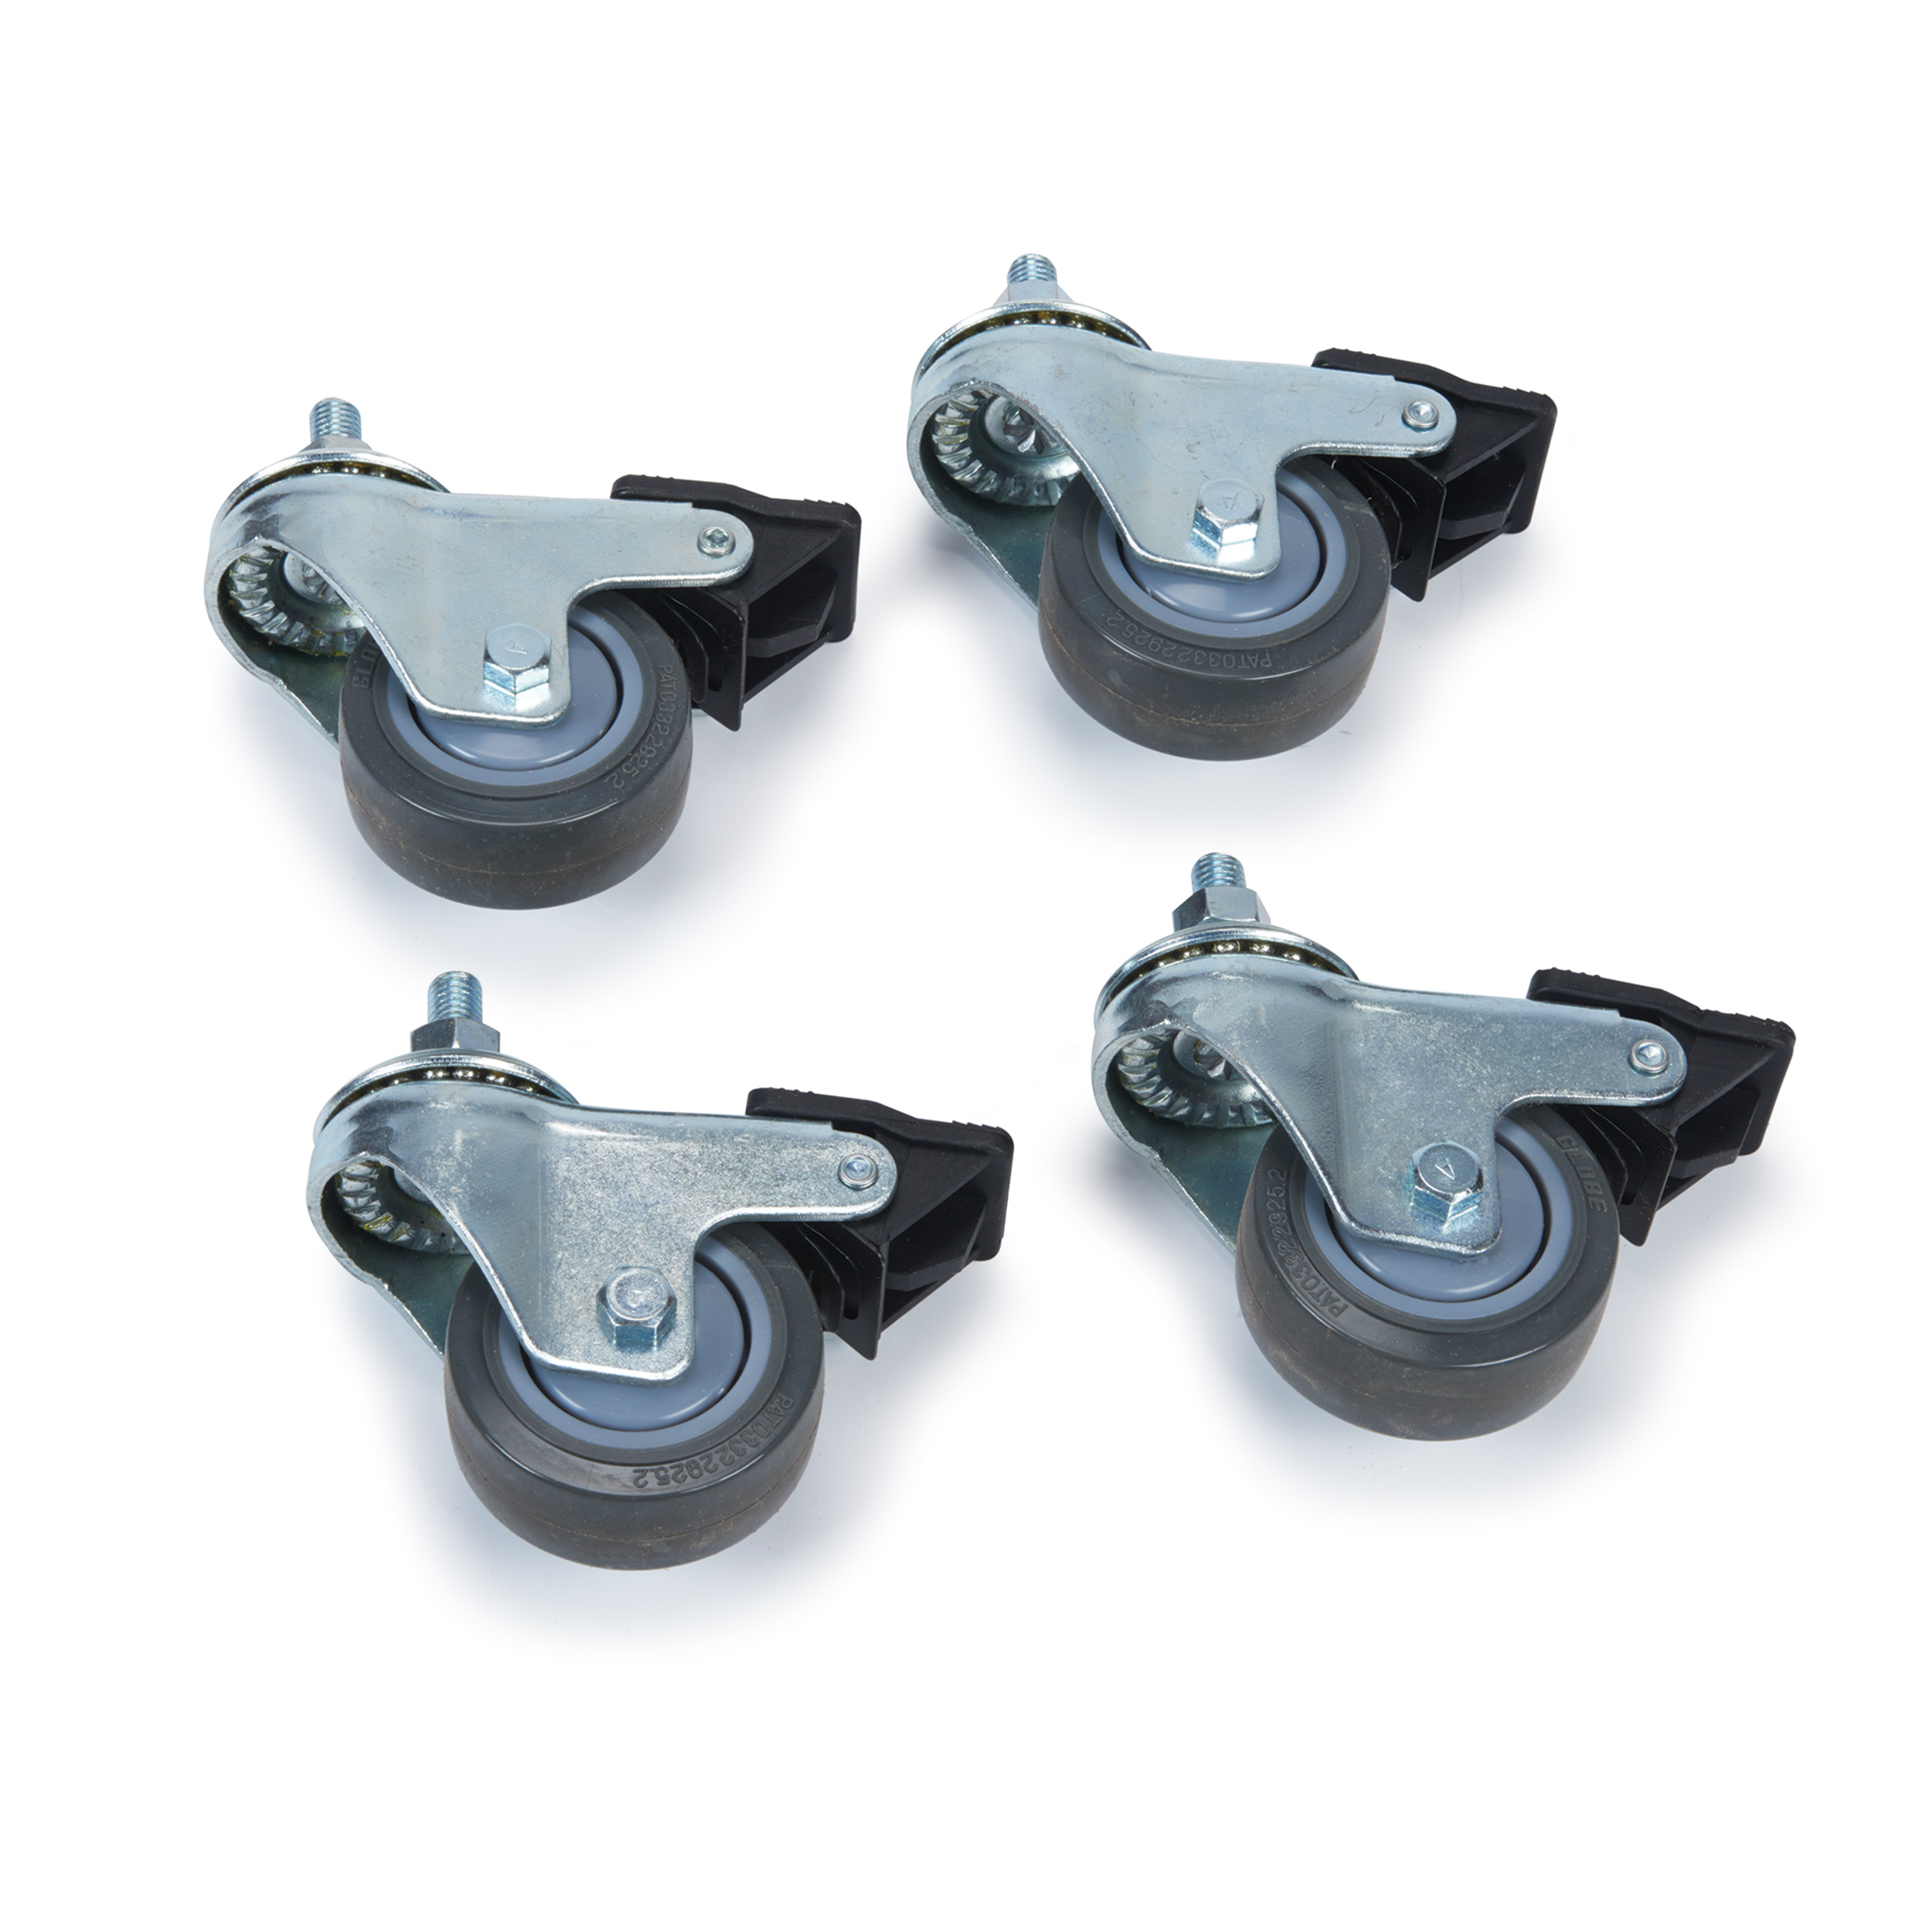 4pc 3" Hd Steel Stand Casters Set